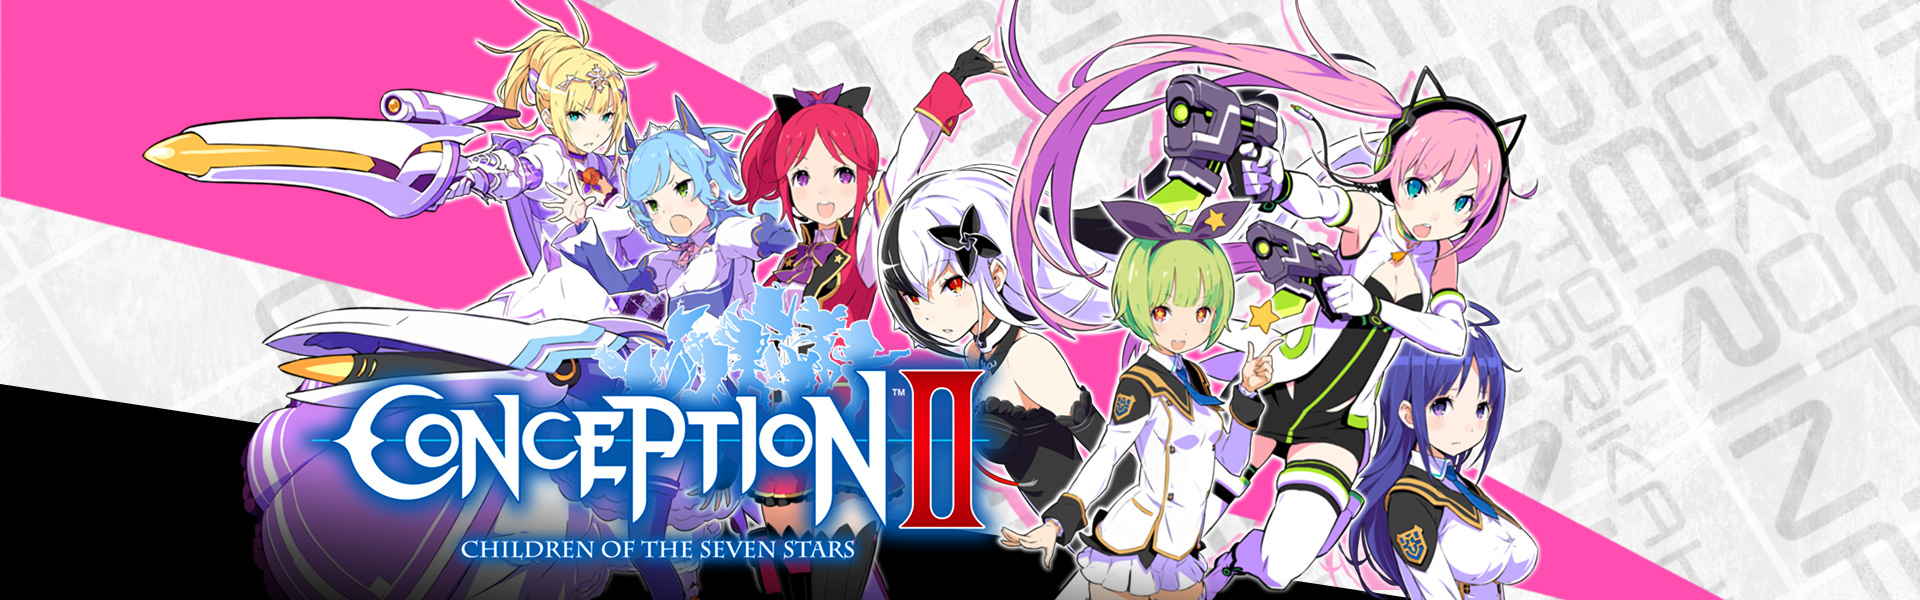 Commission Request Conception 2: Children of the Seven Stars – Cospicky